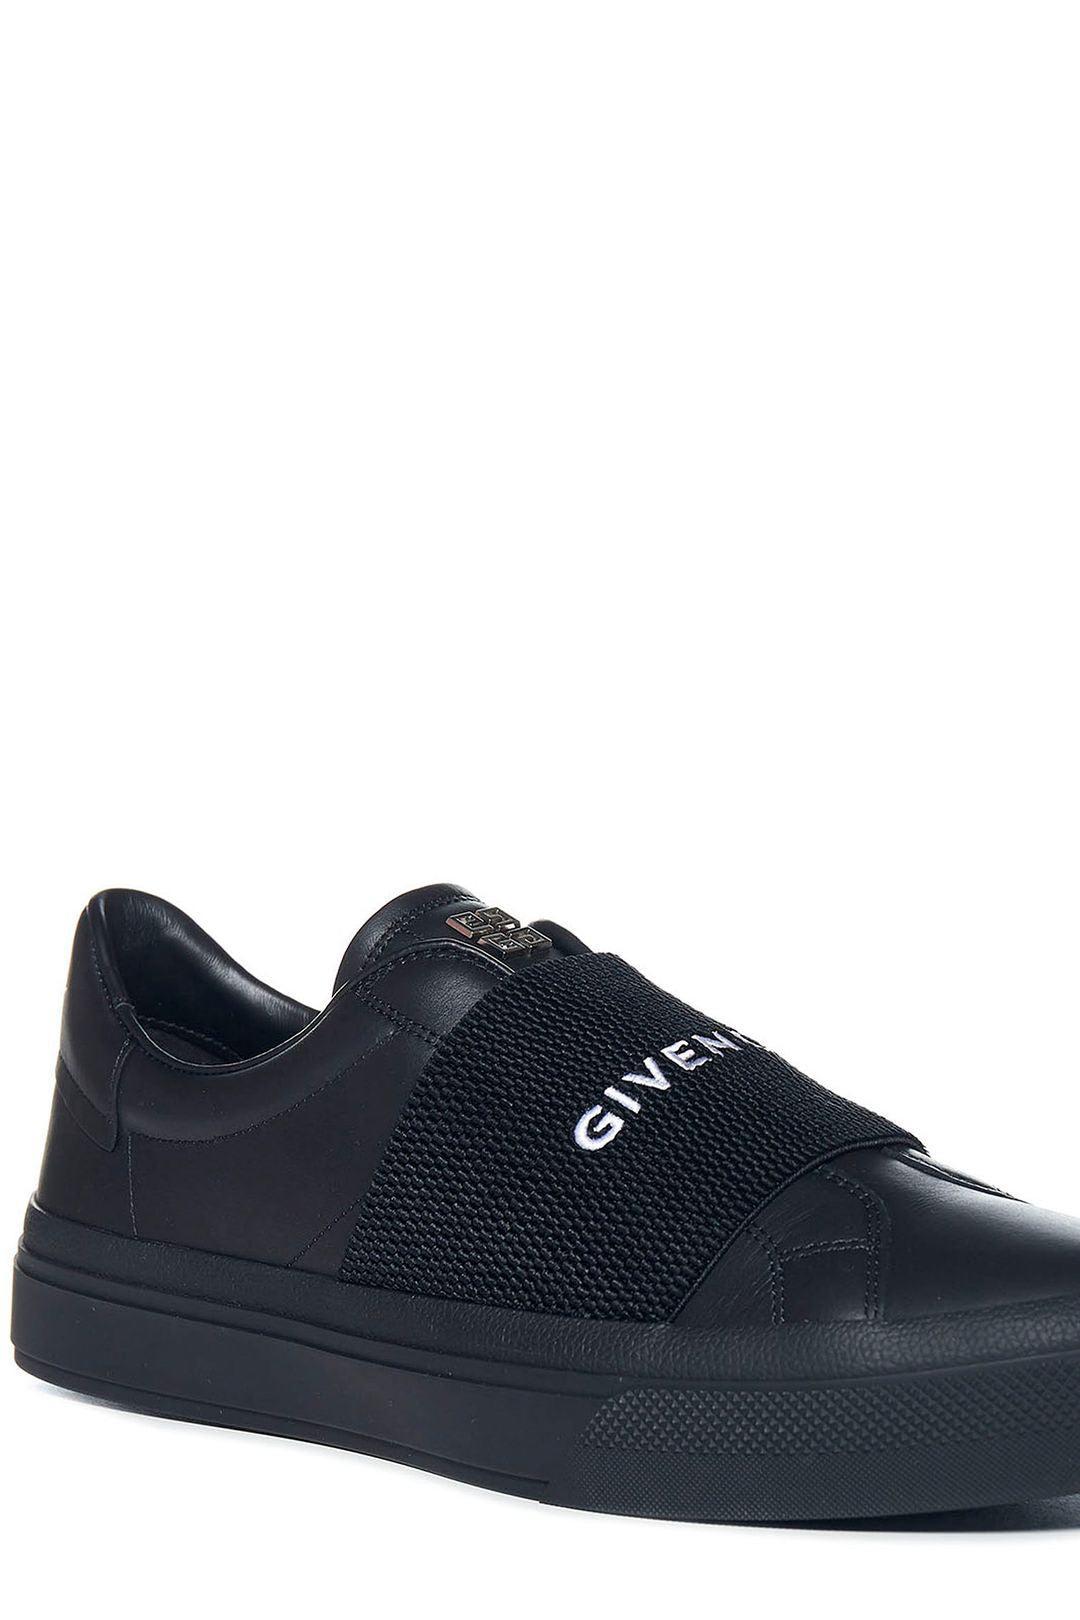 GIVENCHY Sneakers G4 in black